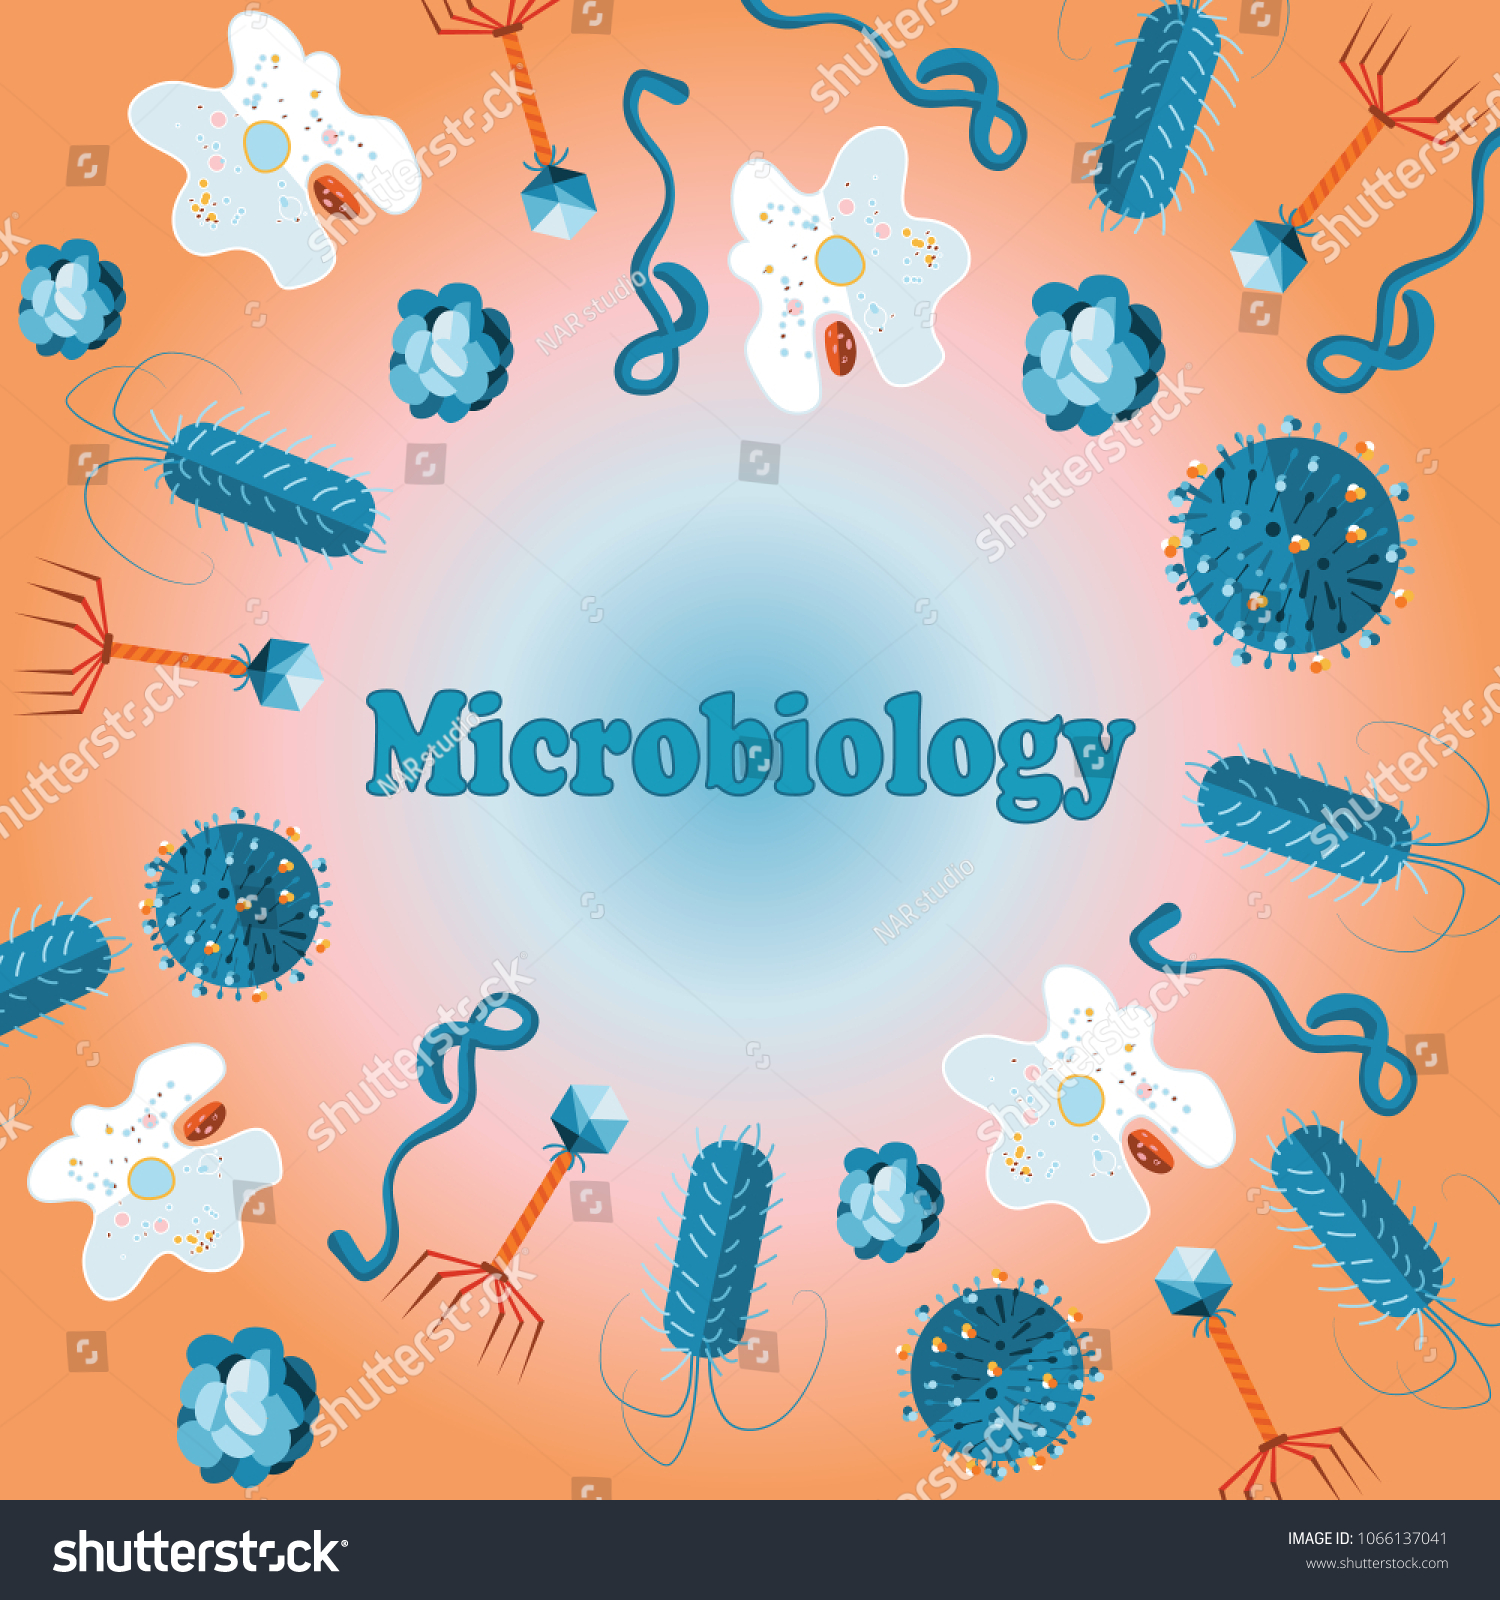 Colorful Microbiology Poster Design Vector Illustration Stock Vector ...